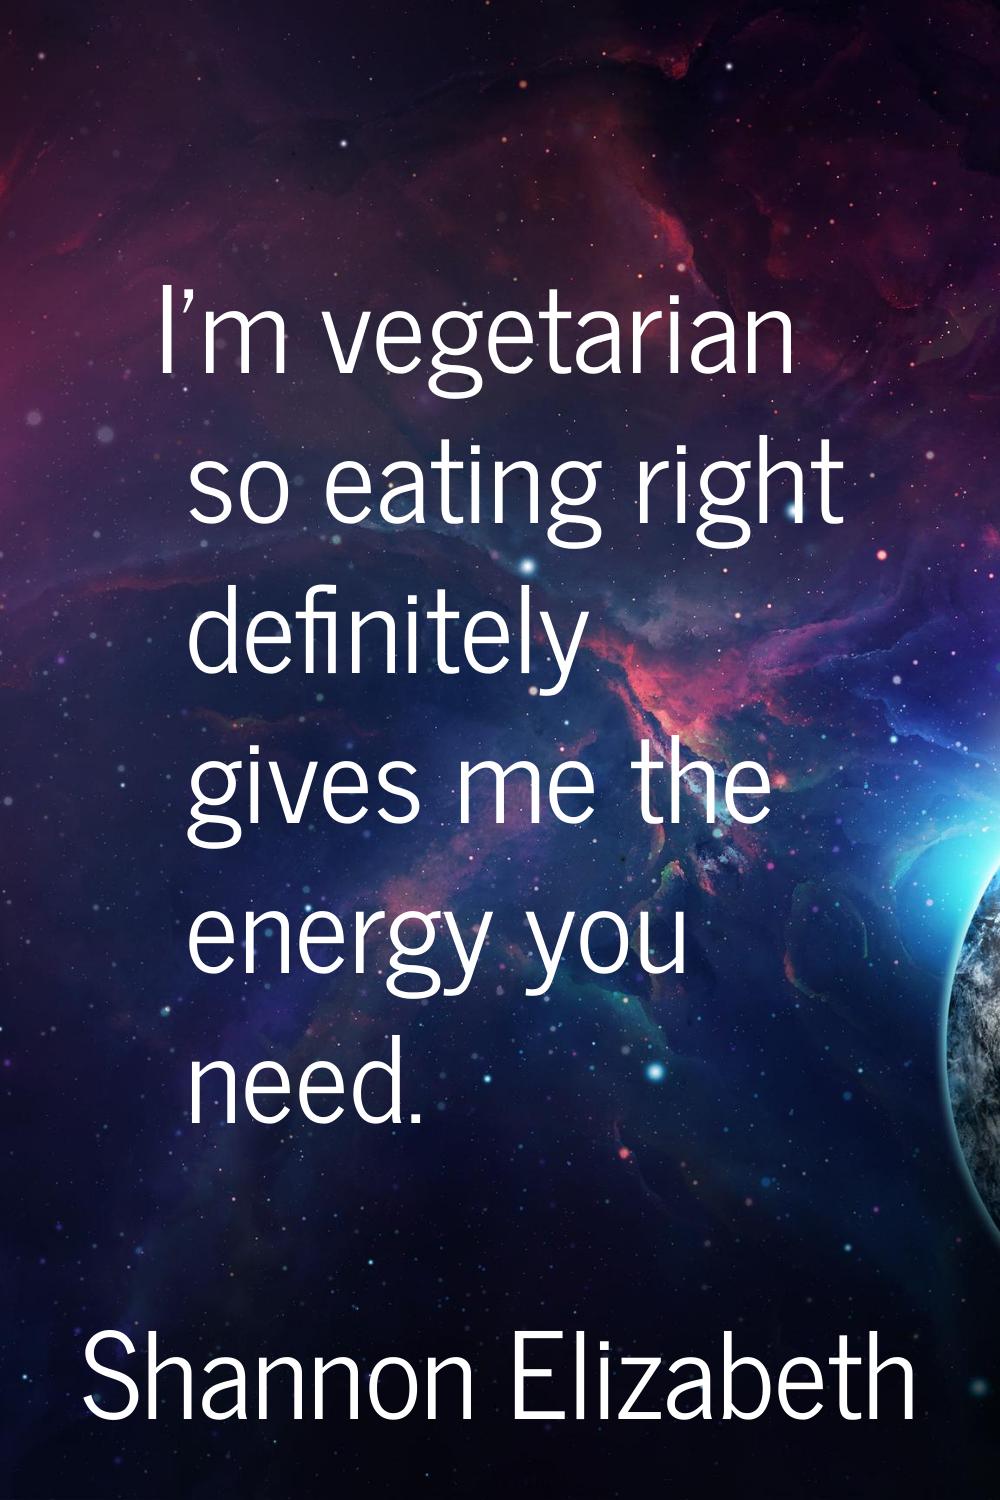 I'm vegetarian so eating right definitely gives me the energy you need.